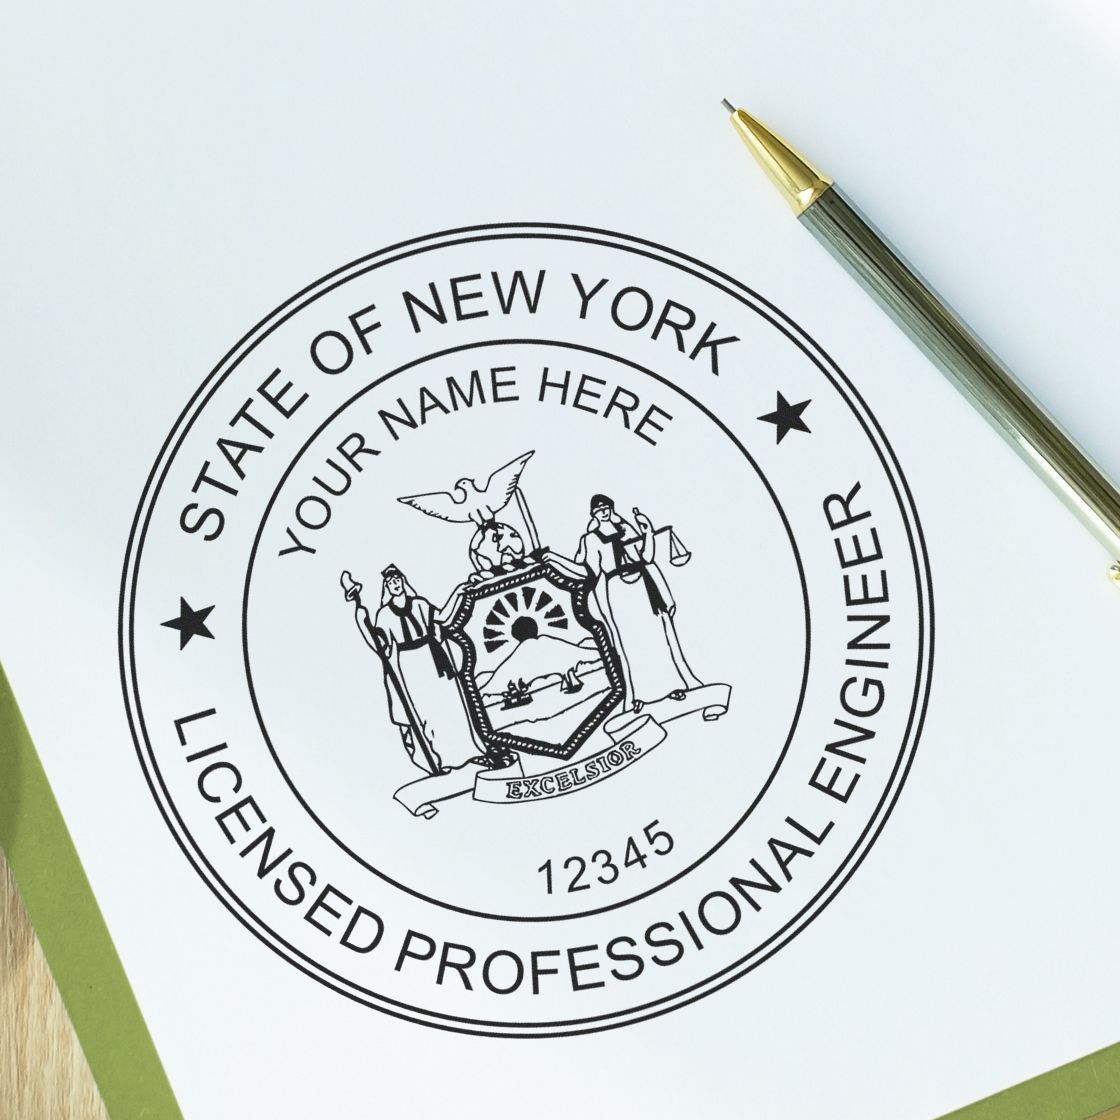 The main image for the Digital New York PE Stamp and Electronic Seal for New York Engineer depicting a sample of the imprint and electronic files